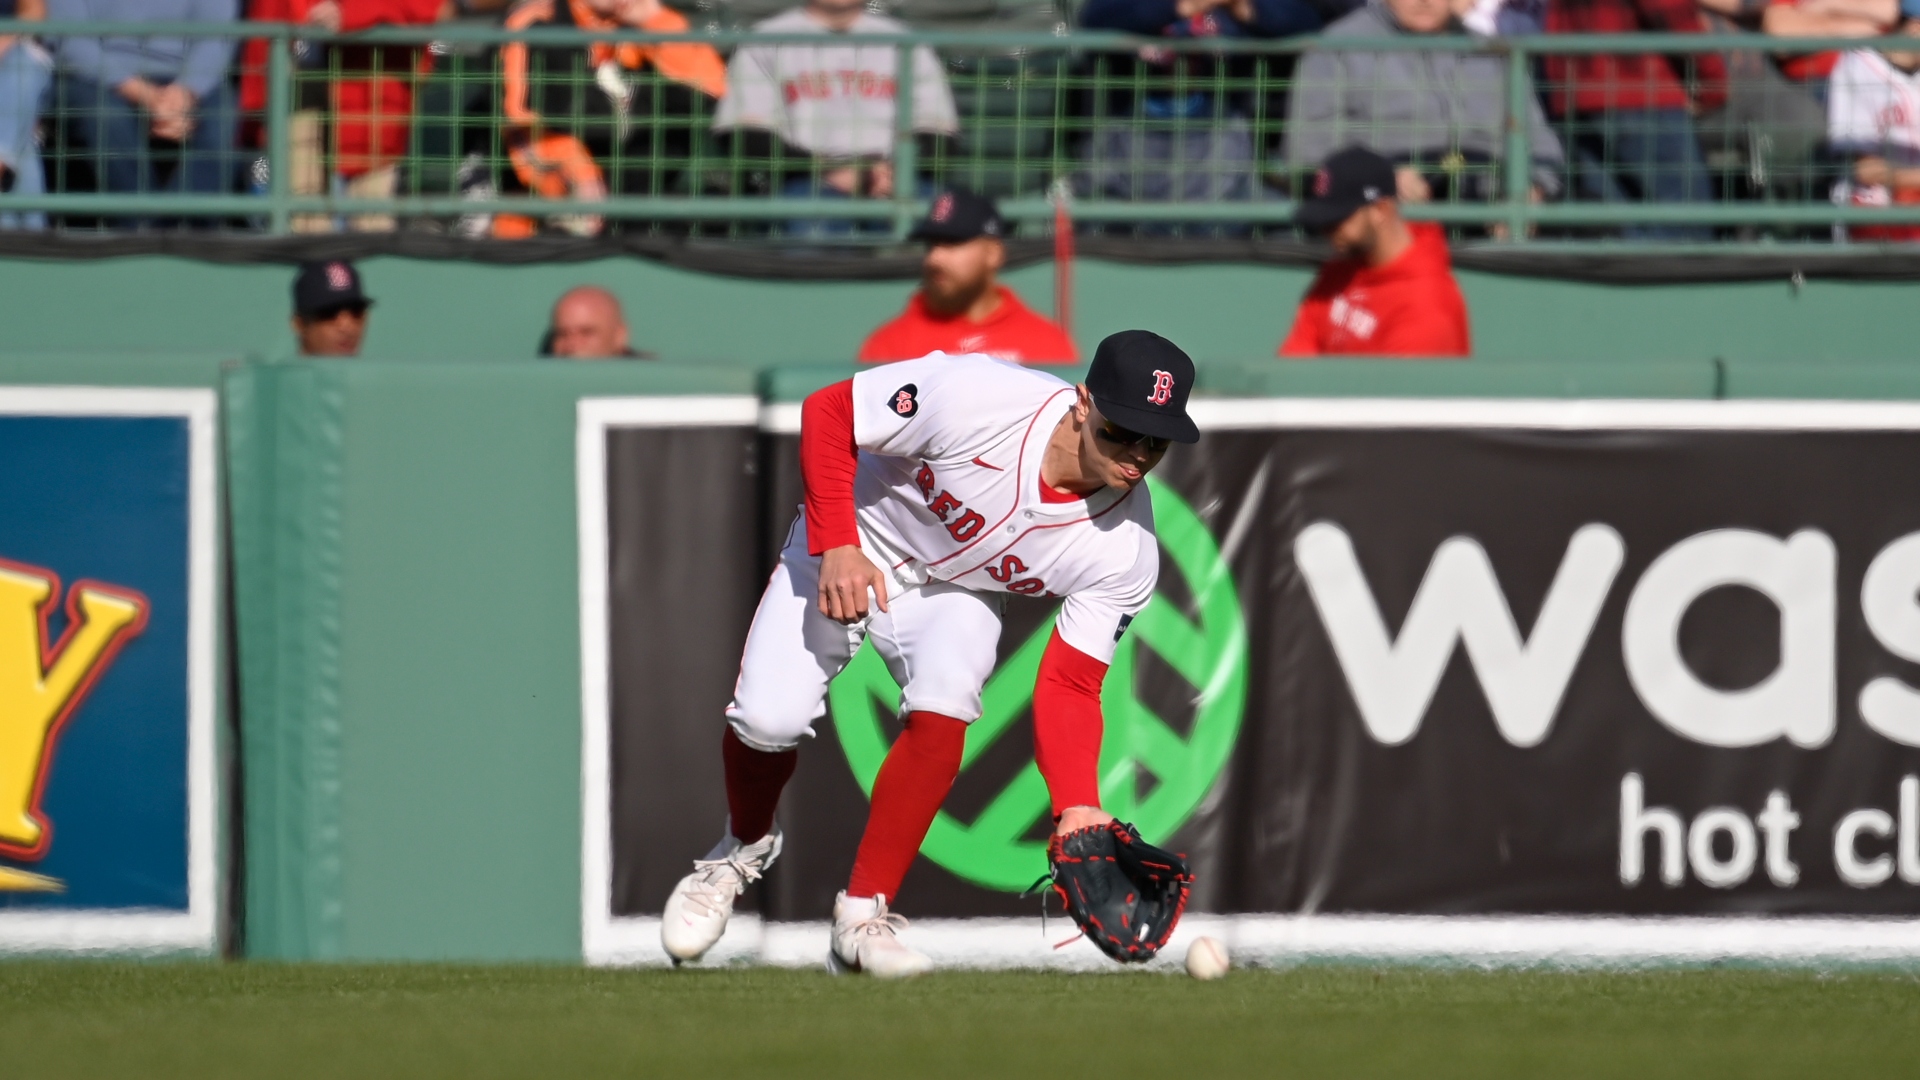 Red Sox Vs. Guardians Lineups: Tyler O’Neill Sits After Collision